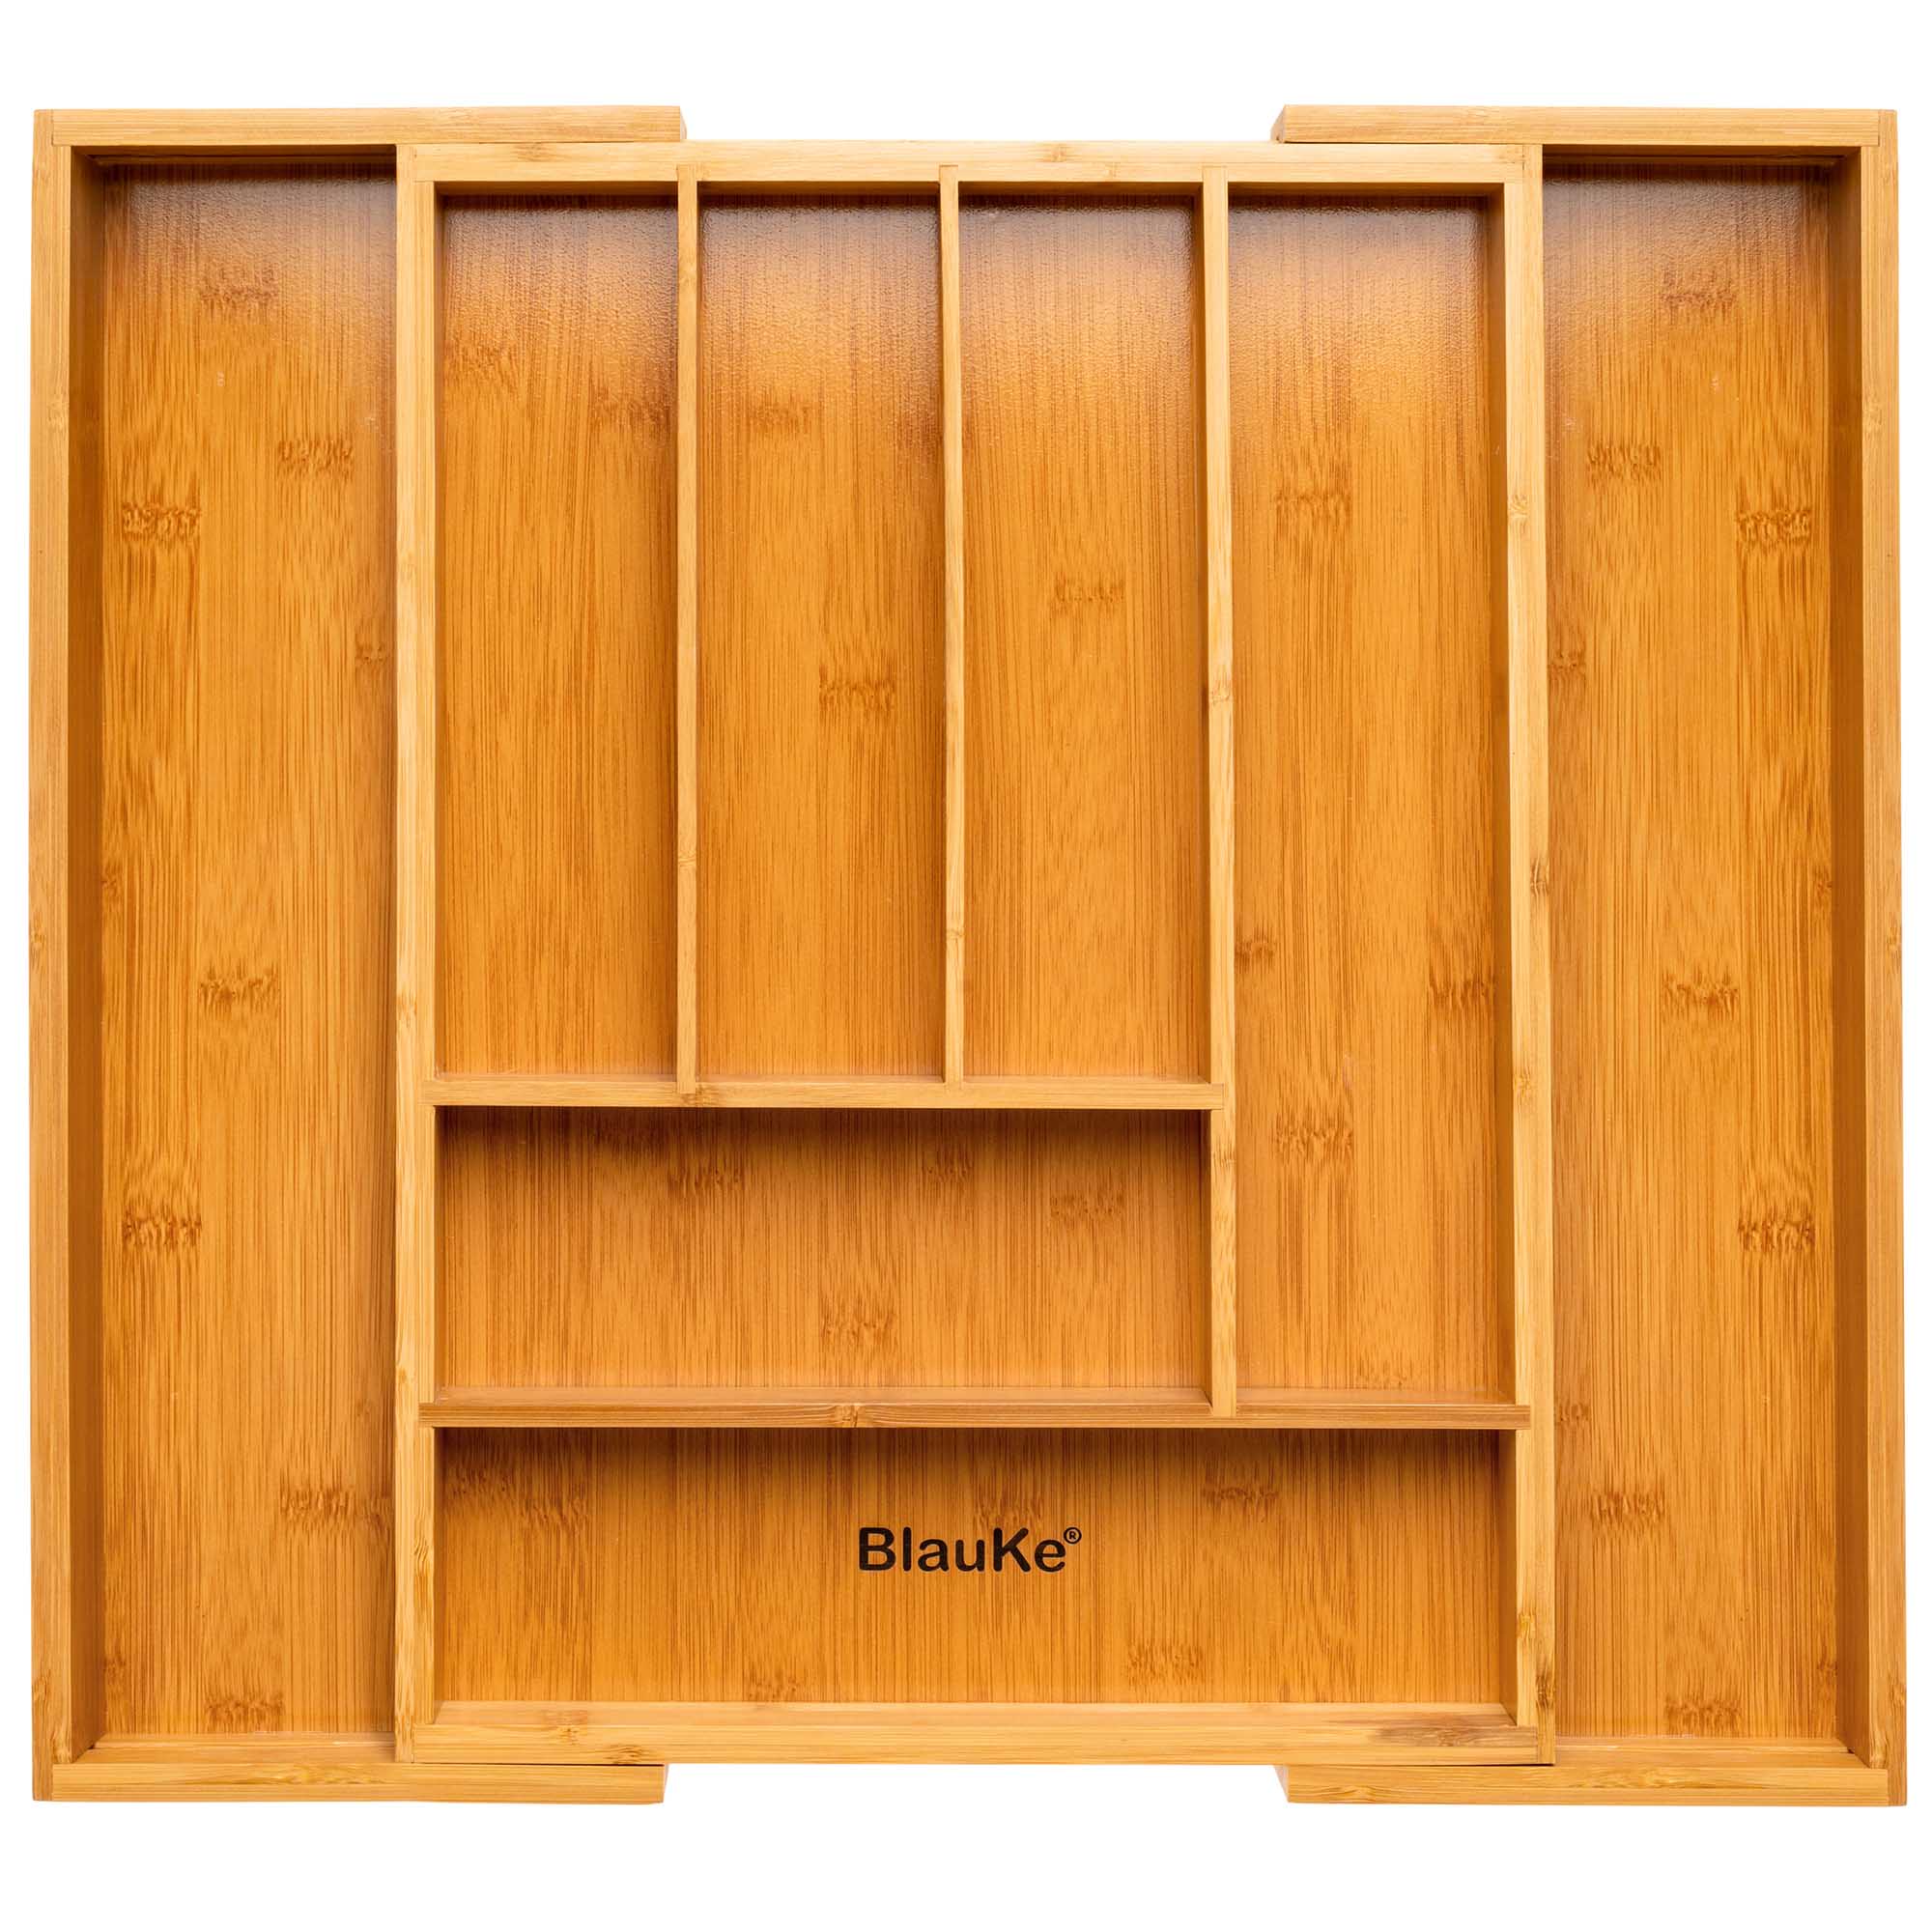 http://blauke.com/cdn/shop/products/Expandable_Bamboo_Drawer_Organizer_-_Expandable_Cutlery_and_Utensil_Drawer_Organizer_-_Large_Kitchen_Drawer_Organizer_-_Adjustable_Cutlery_Drawer_Tray_Organizer_with_8_Compartments_20_f0696359-a6b3-4f91-b843-6a3815f0d9c1.jpg?v=1594905894